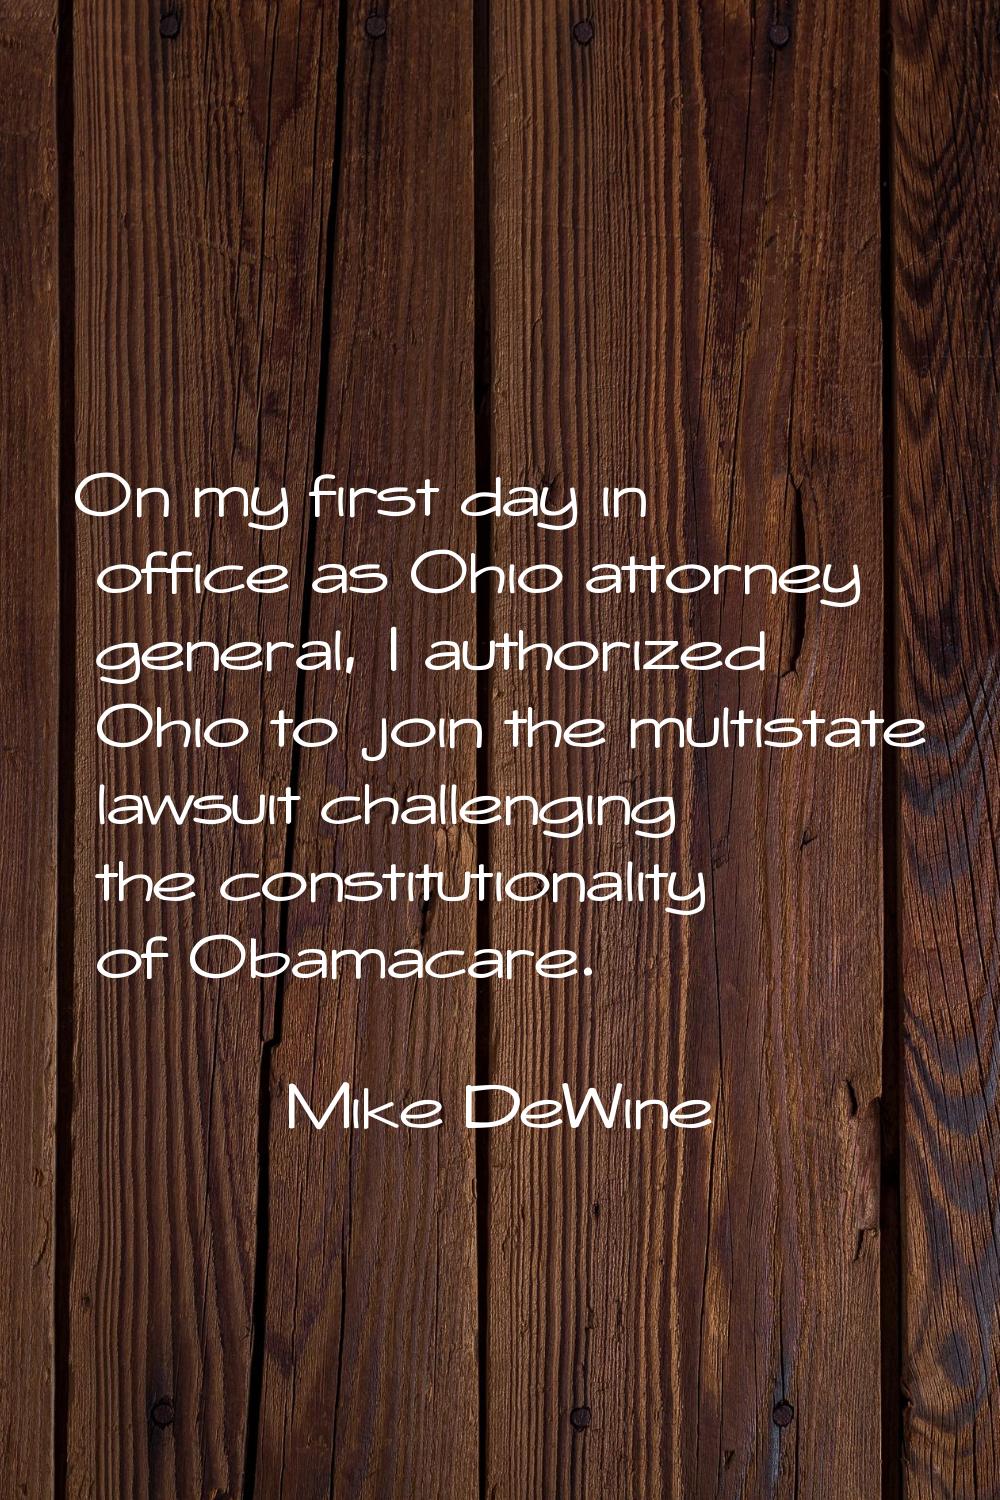 On my first day in office as Ohio attorney general, I authorized Ohio to join the multistate lawsui